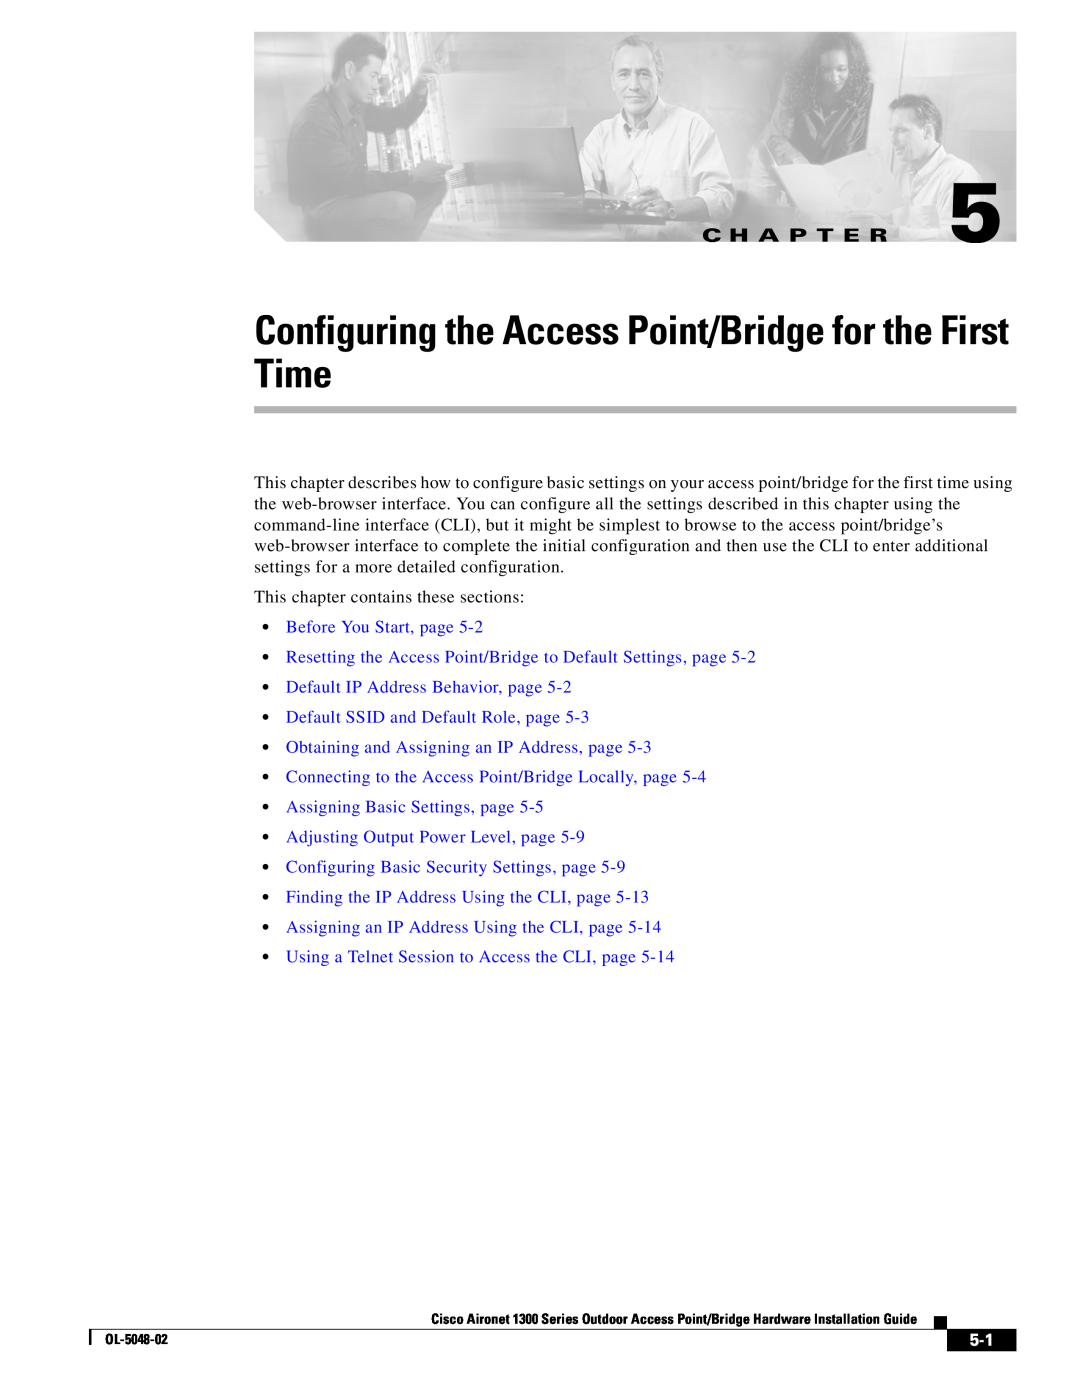 Cisco Systems 1300 Series Configuring the Access Point/Bridge for the First Time, Before You Start, page, C H A P T E R 